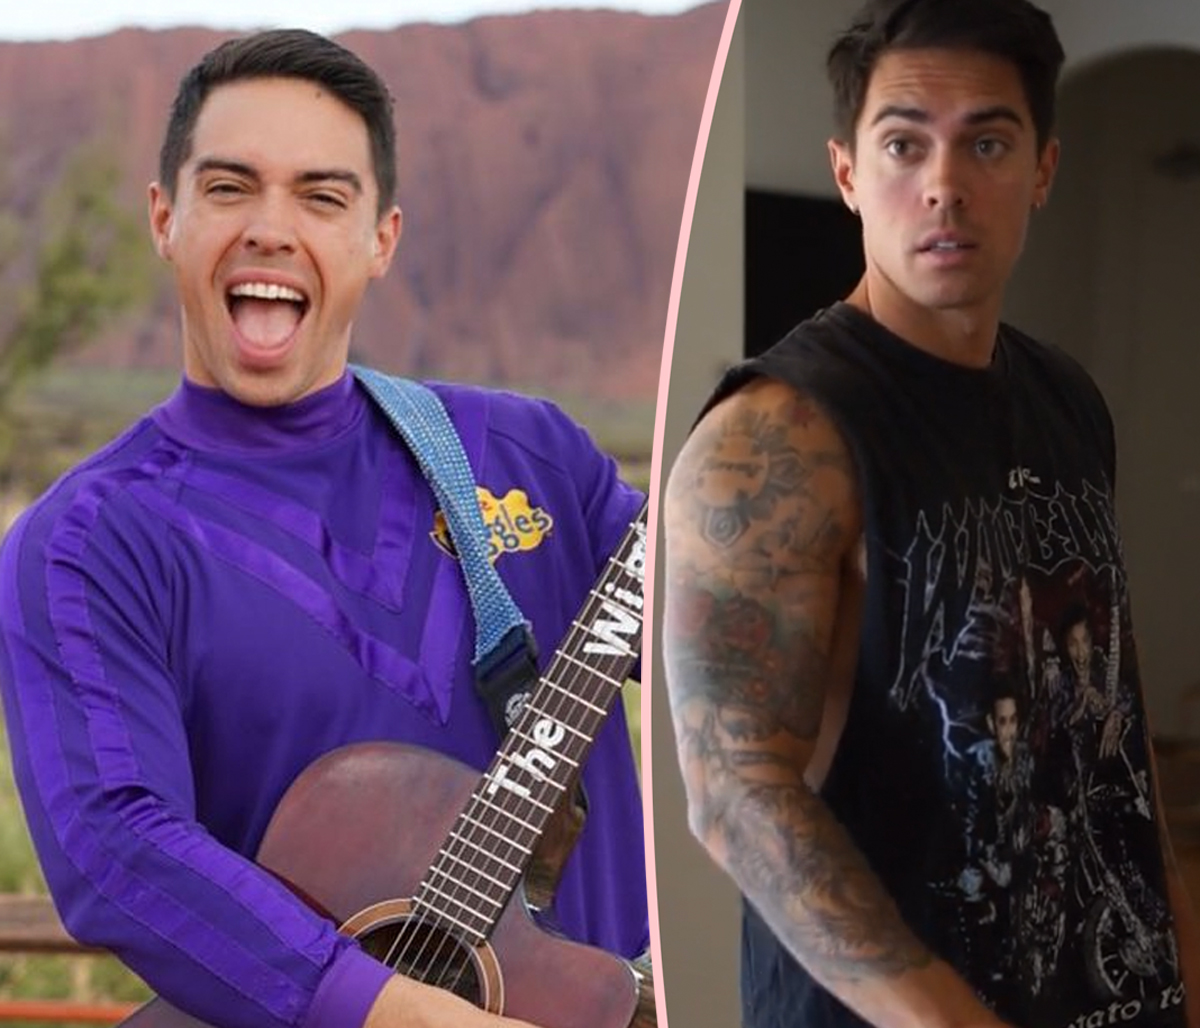 #The Internet Is THIRSTY AF For The New Wiggles Member!